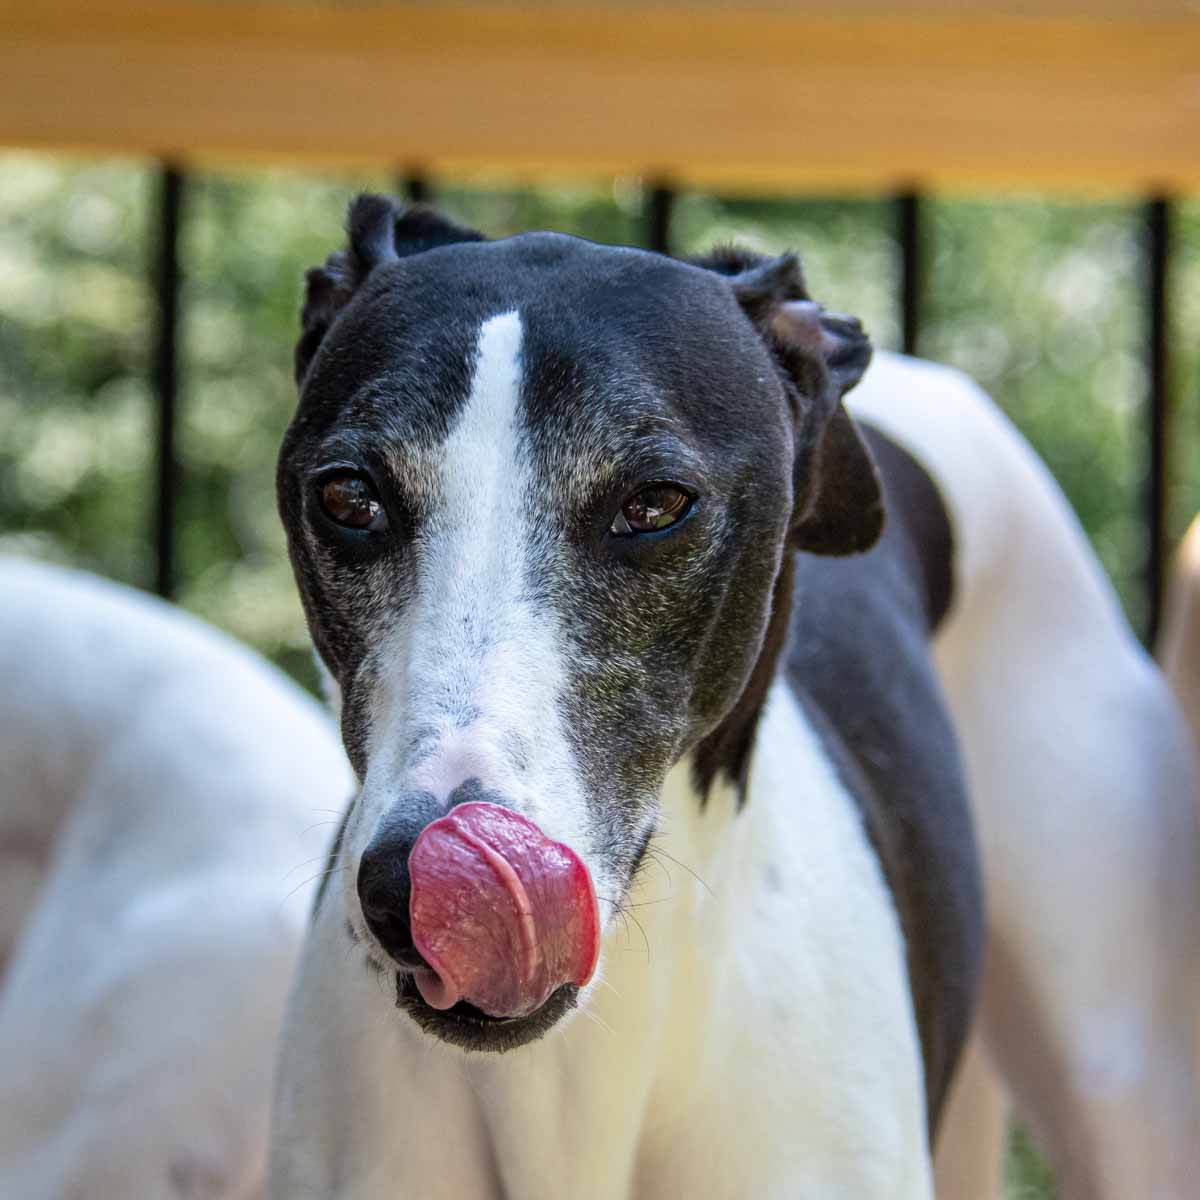 whippet dog licking his nose.